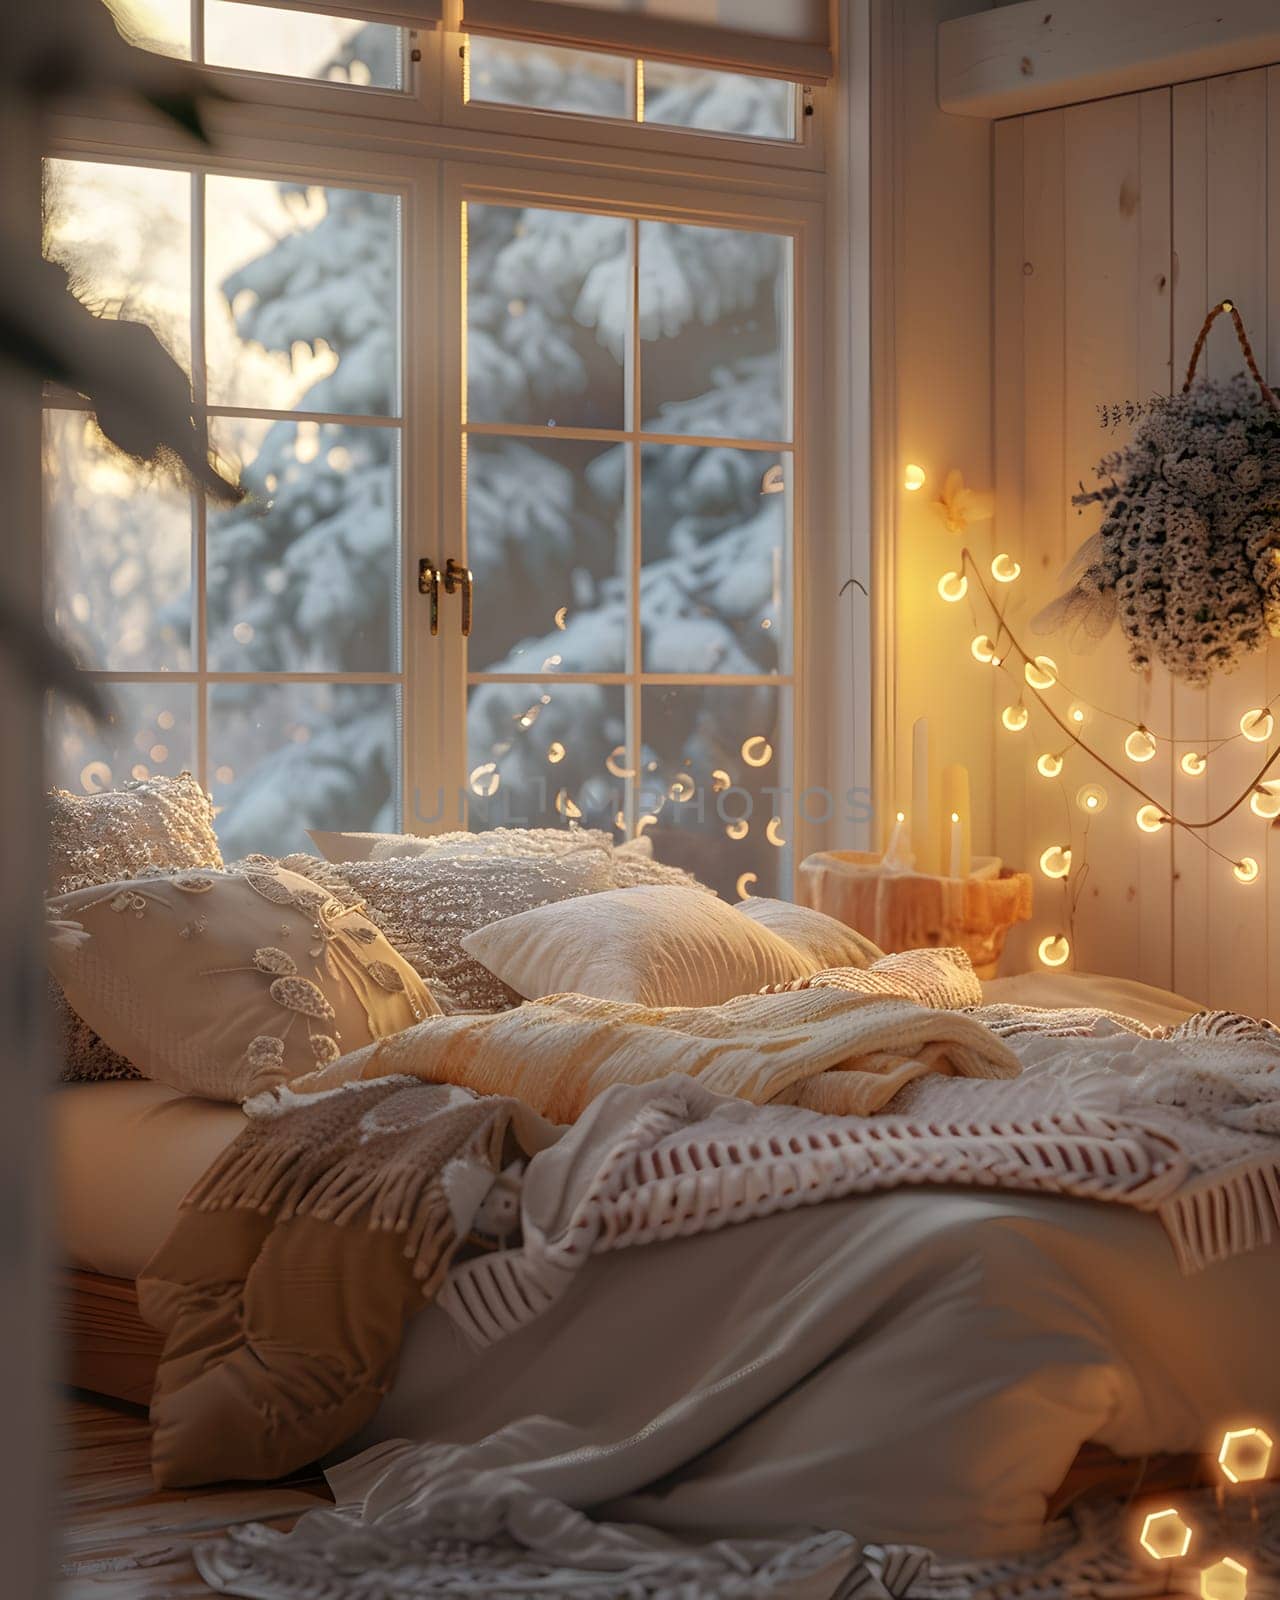 A cozy bedroom with a wood bed frame, hardwood flooring, a window for natural light, and Christmas lights as decoration for added comfort